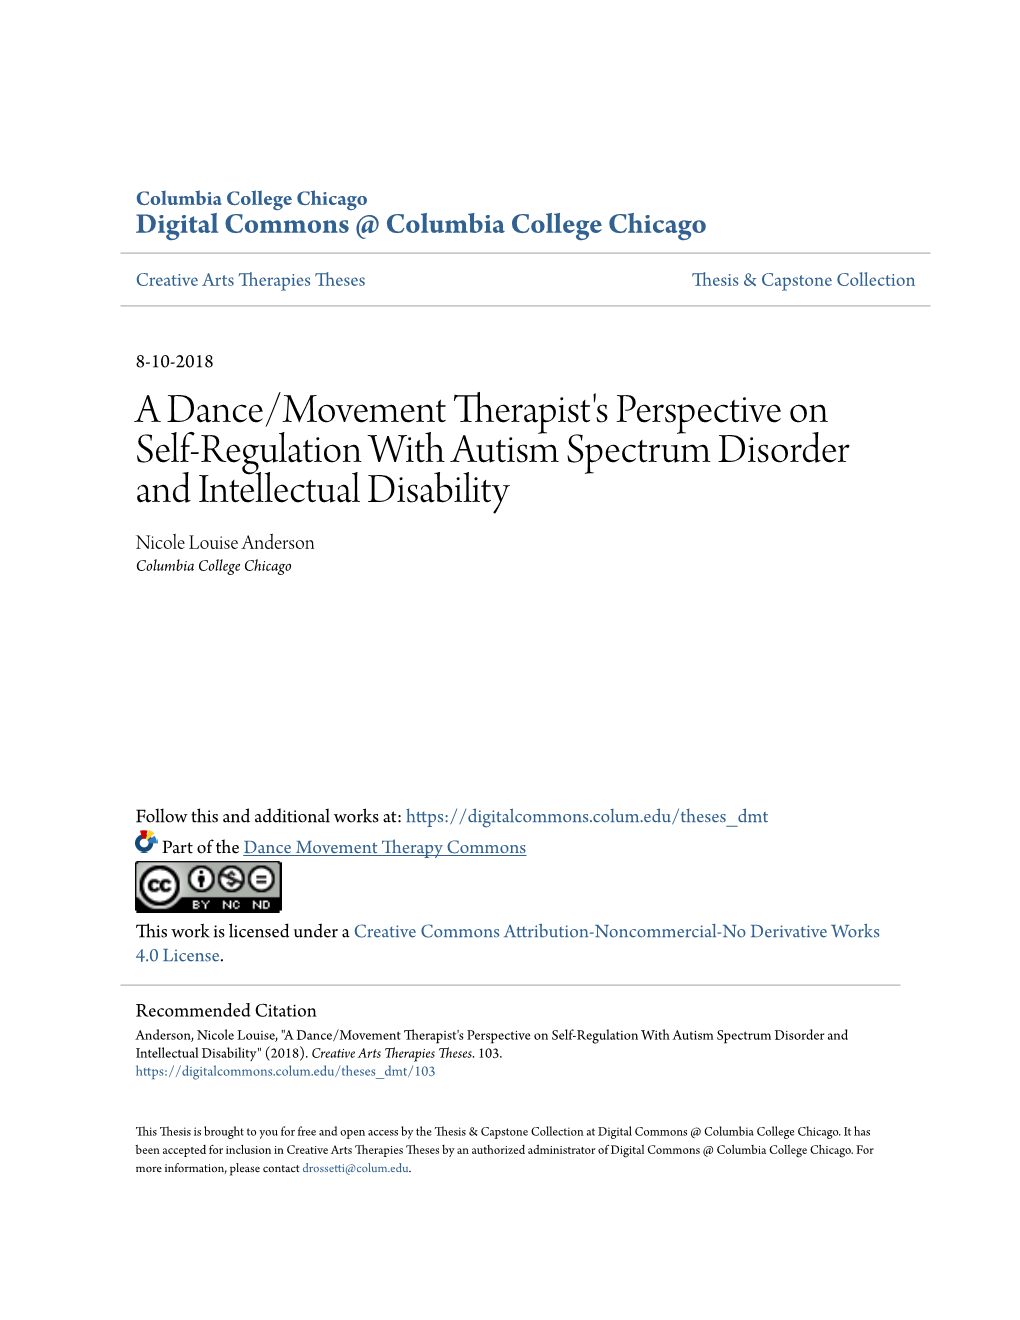 A Dance/Movement Therapist's Perspective on Self-Regulation with Autism Spectrum Disorder and Intellectual Disability Nicole Louise Anderson Columbia College Chicago